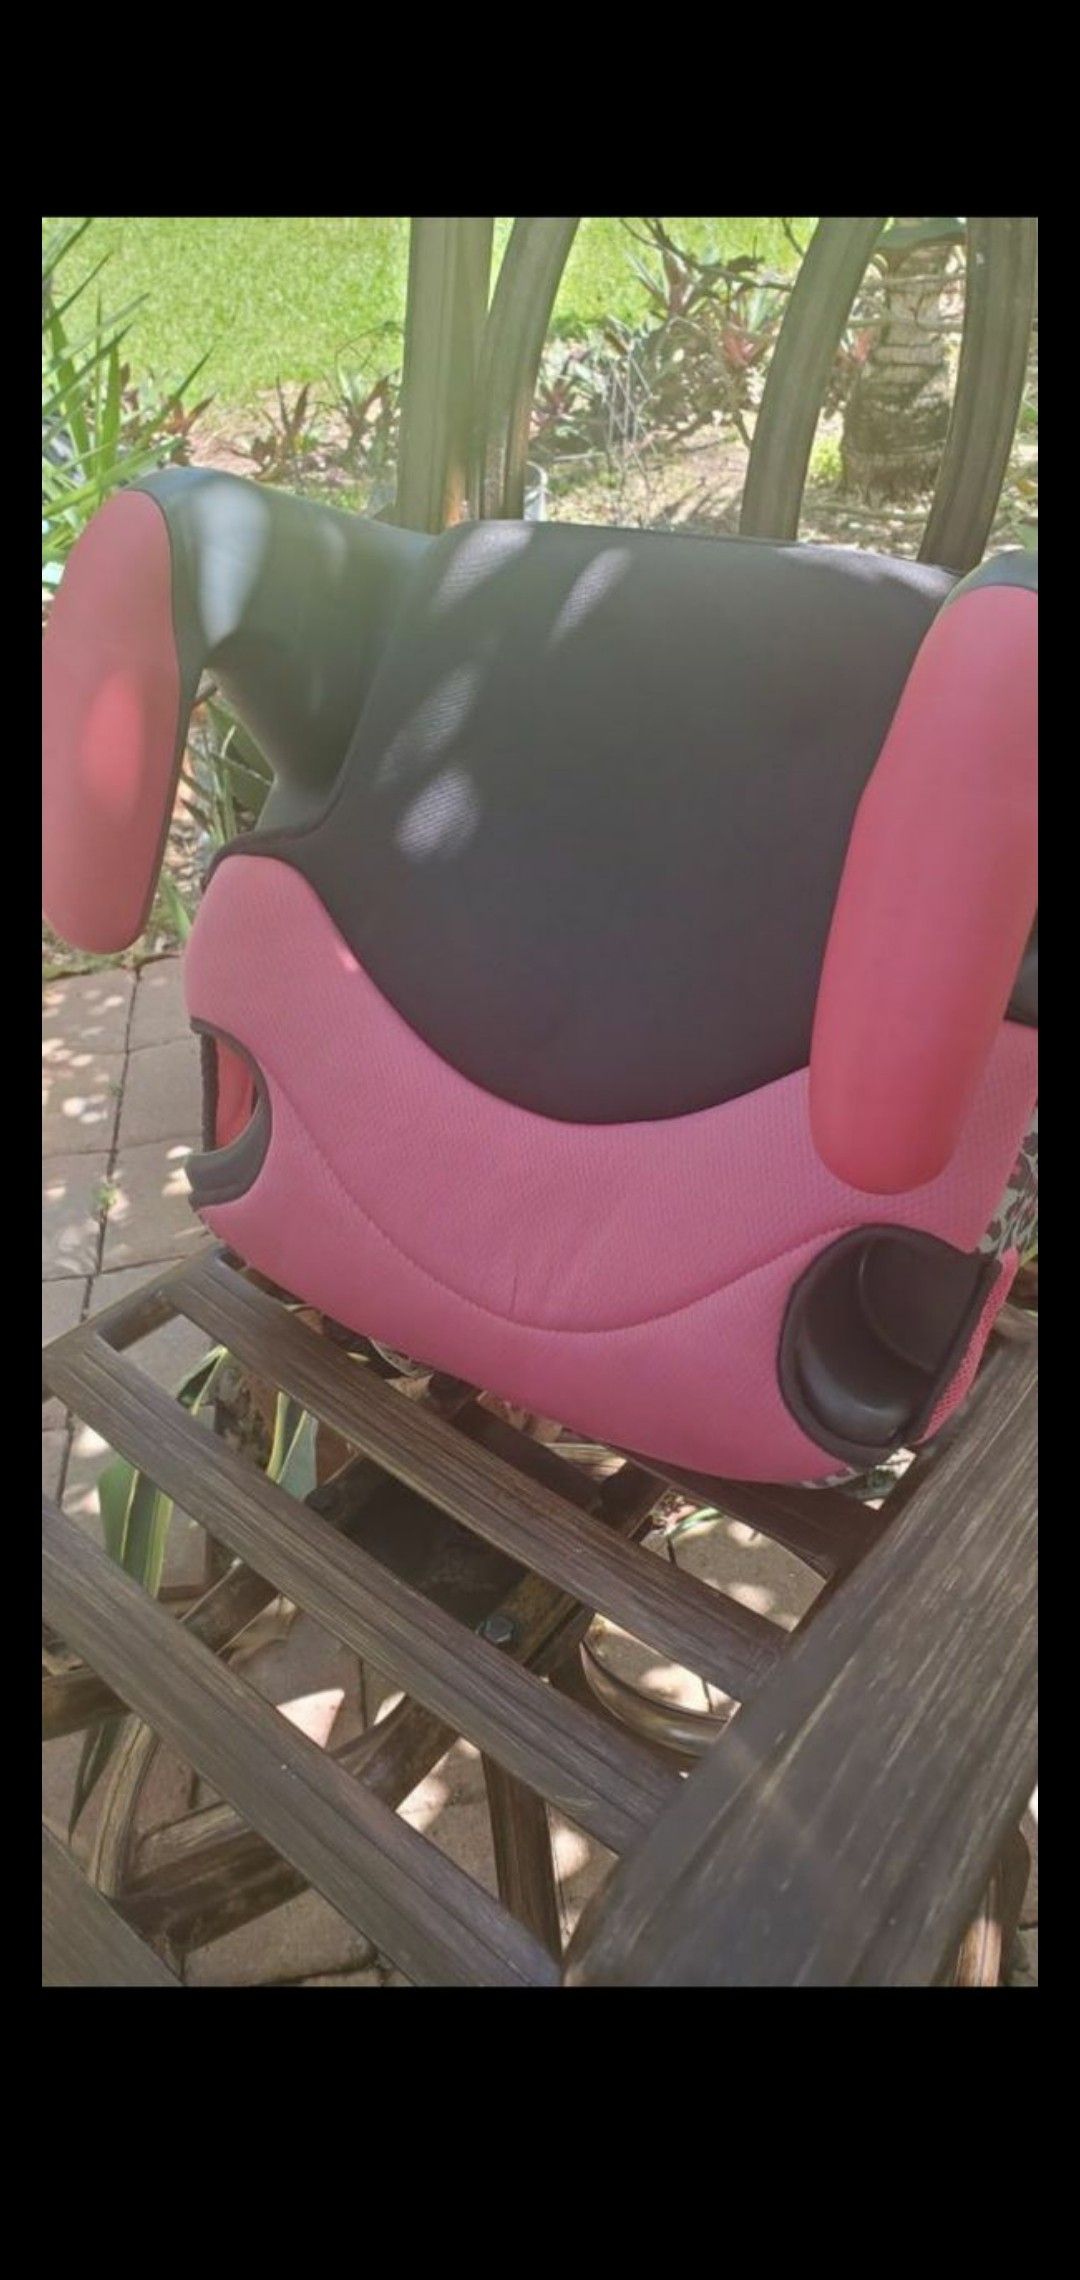 evenflo booster seat pink and grey in great condition baby seat ....LOCATED ON KROME AND SW 200ST